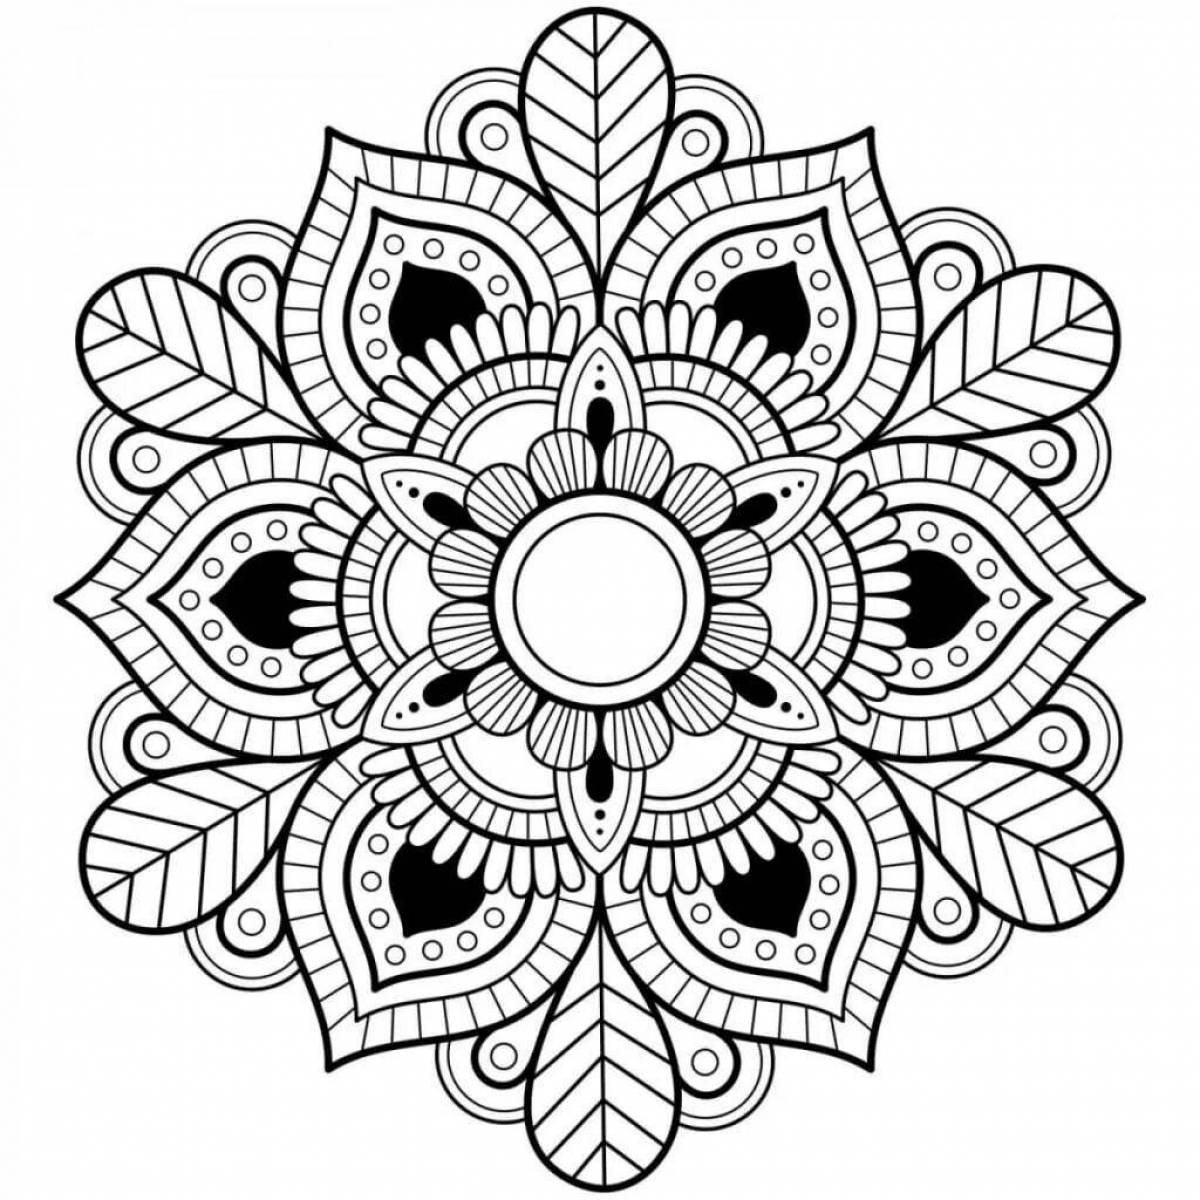 Exquisite happiness mandala coloring page